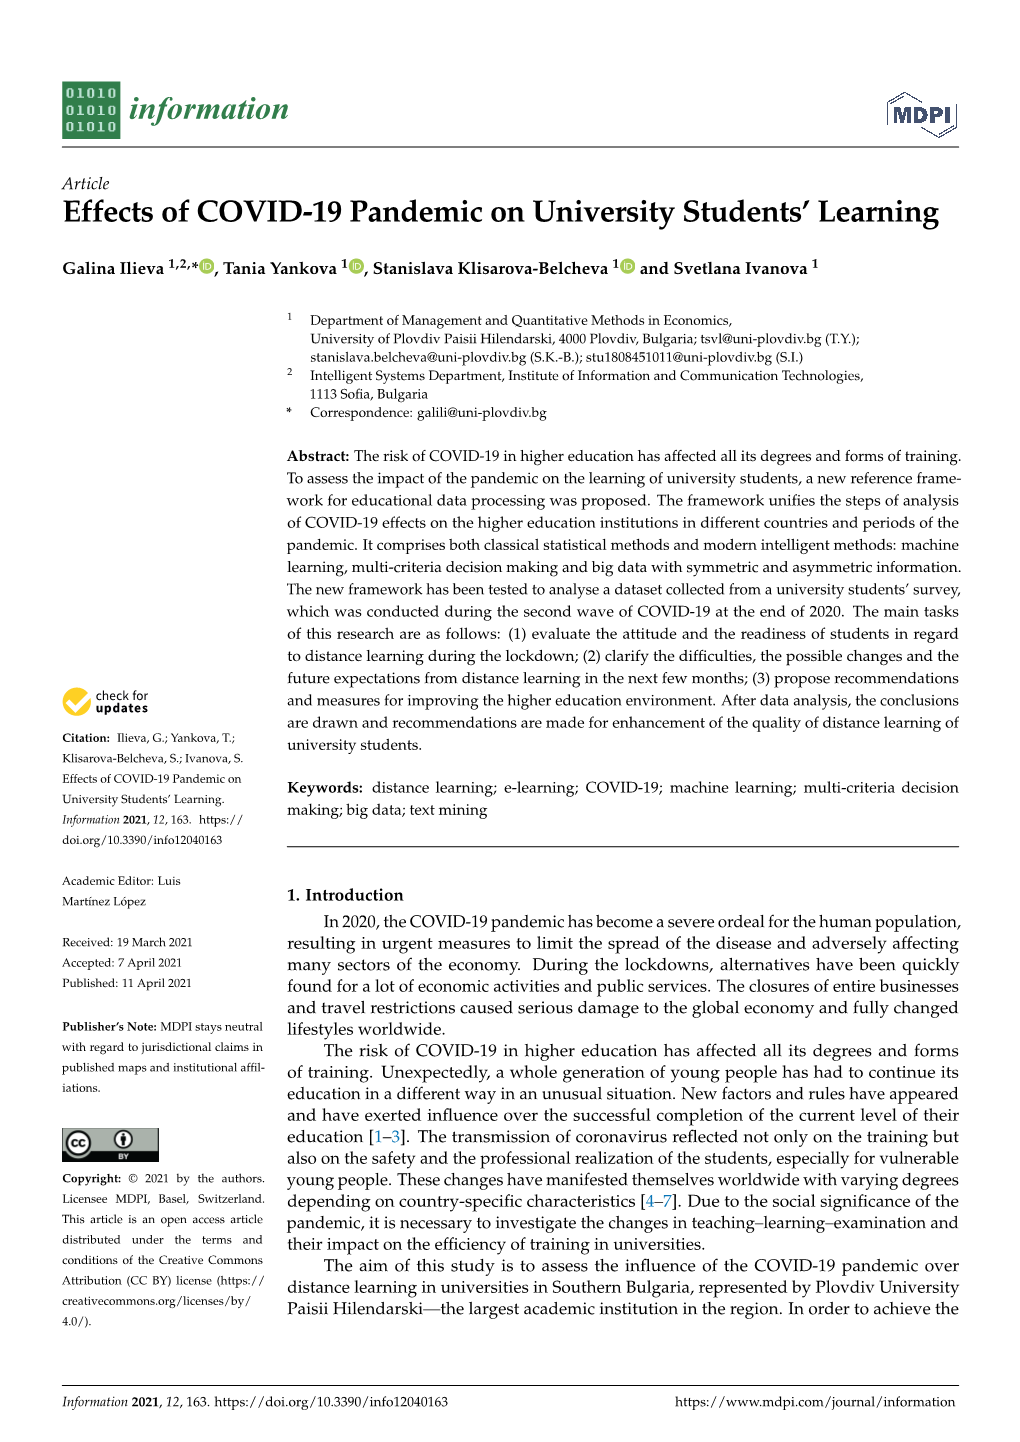 Effects of COVID-19 Pandemic on University Students' Learning